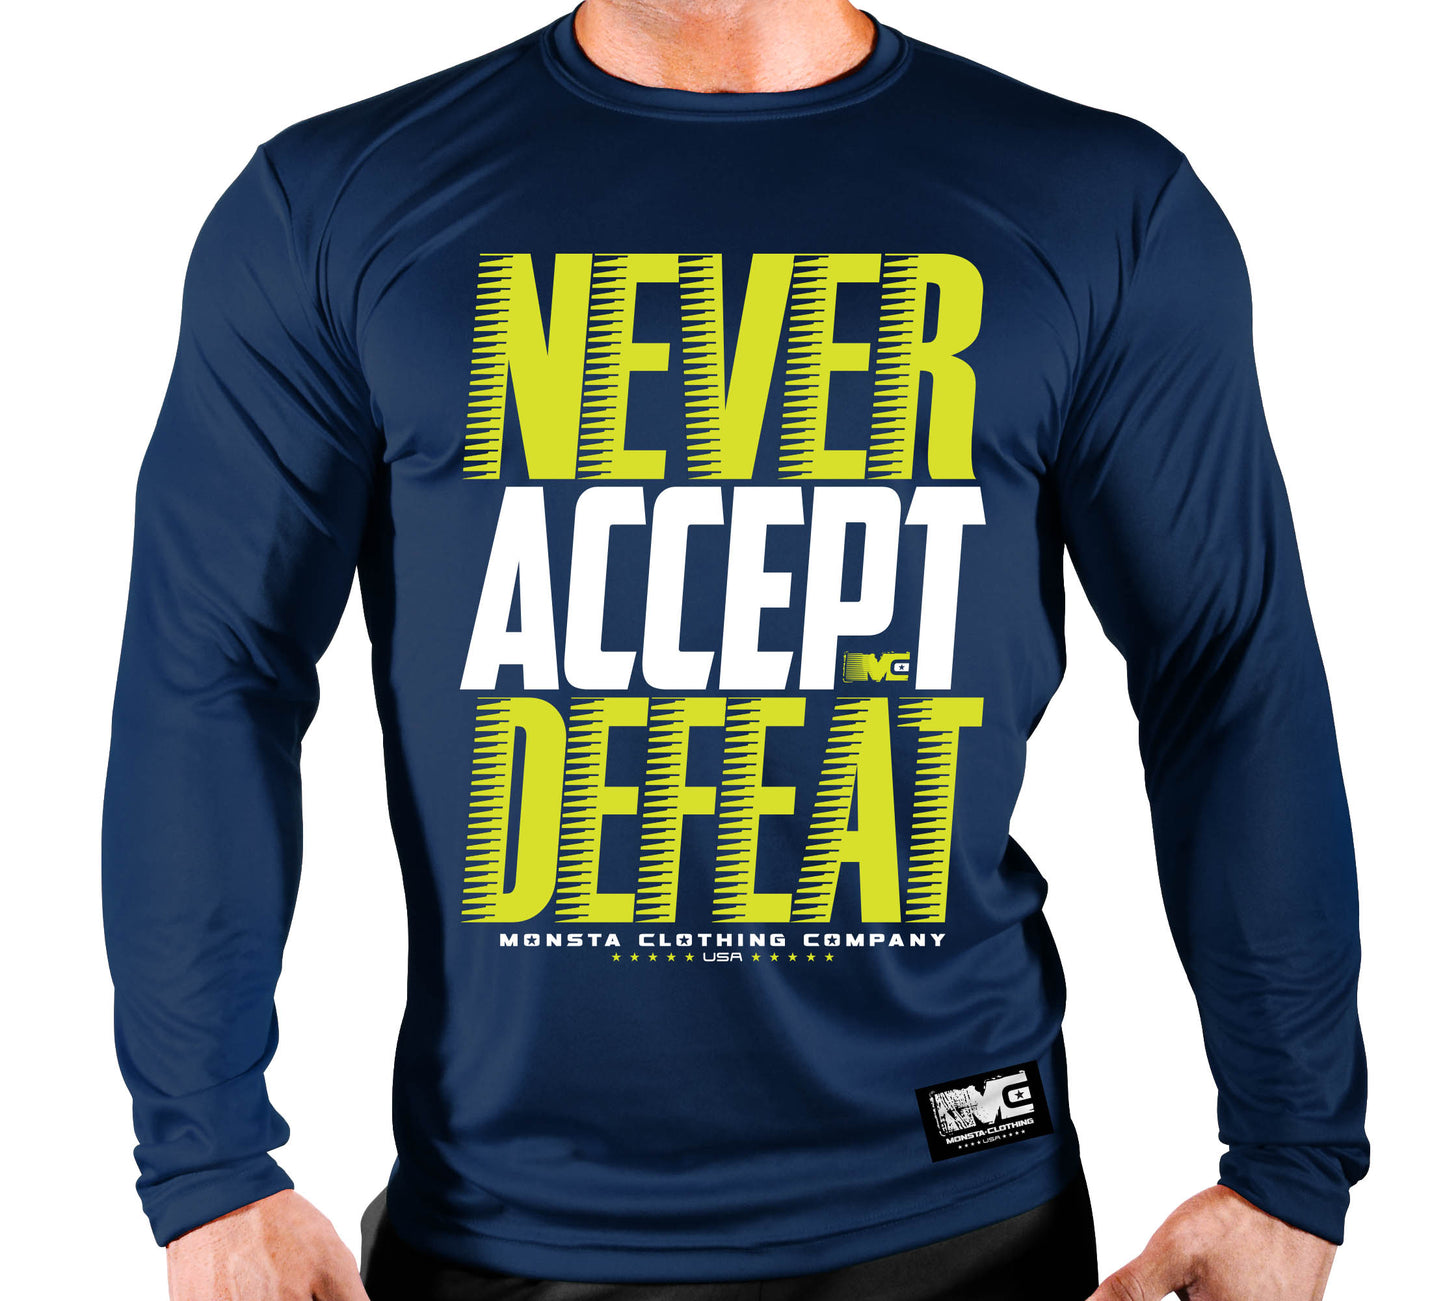 Never Accept Defeat-232: WT-Safety Yellow